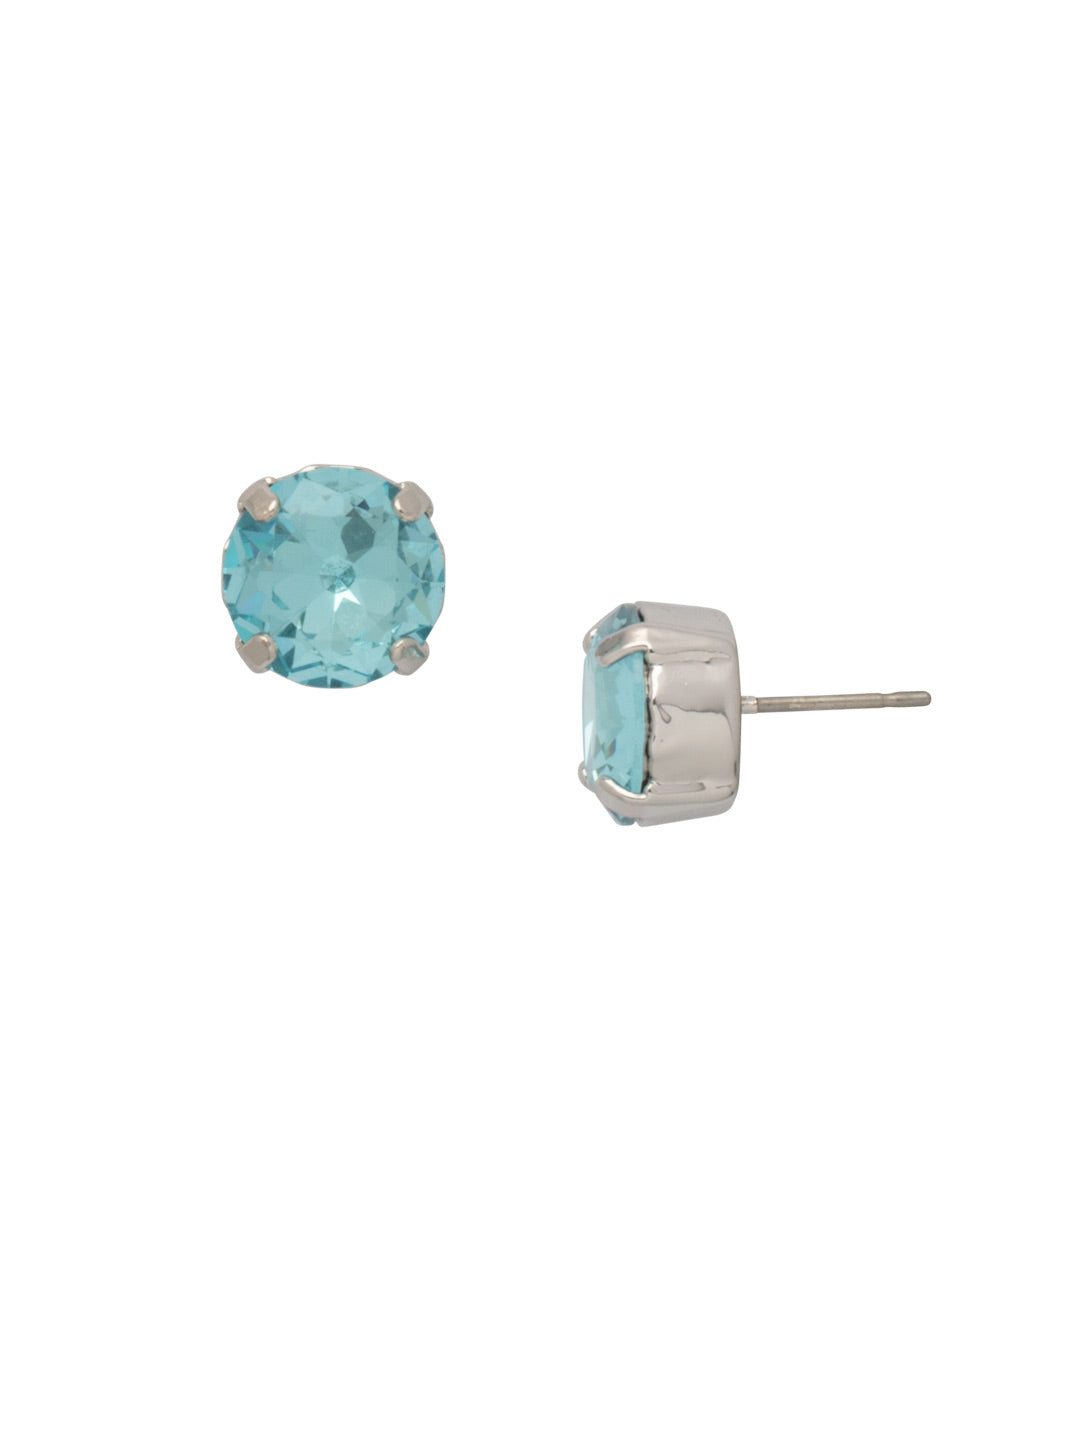 London Stud Earrings - ECM14RHAQU - <p>Everyone needs a great pair of studs. Add some classic sparkle to any occasion with these stud earrings. Need help picking a stud? <a href="https://www.sorrelli.com/blogs/sisterhood/round-stud-earrings-101-a-rundown-of-sizes-styles-and-sparkle">Check out our size guide!</a> From Sorrelli's Aquamarine collection in our Palladium Silver-tone finish.</p>